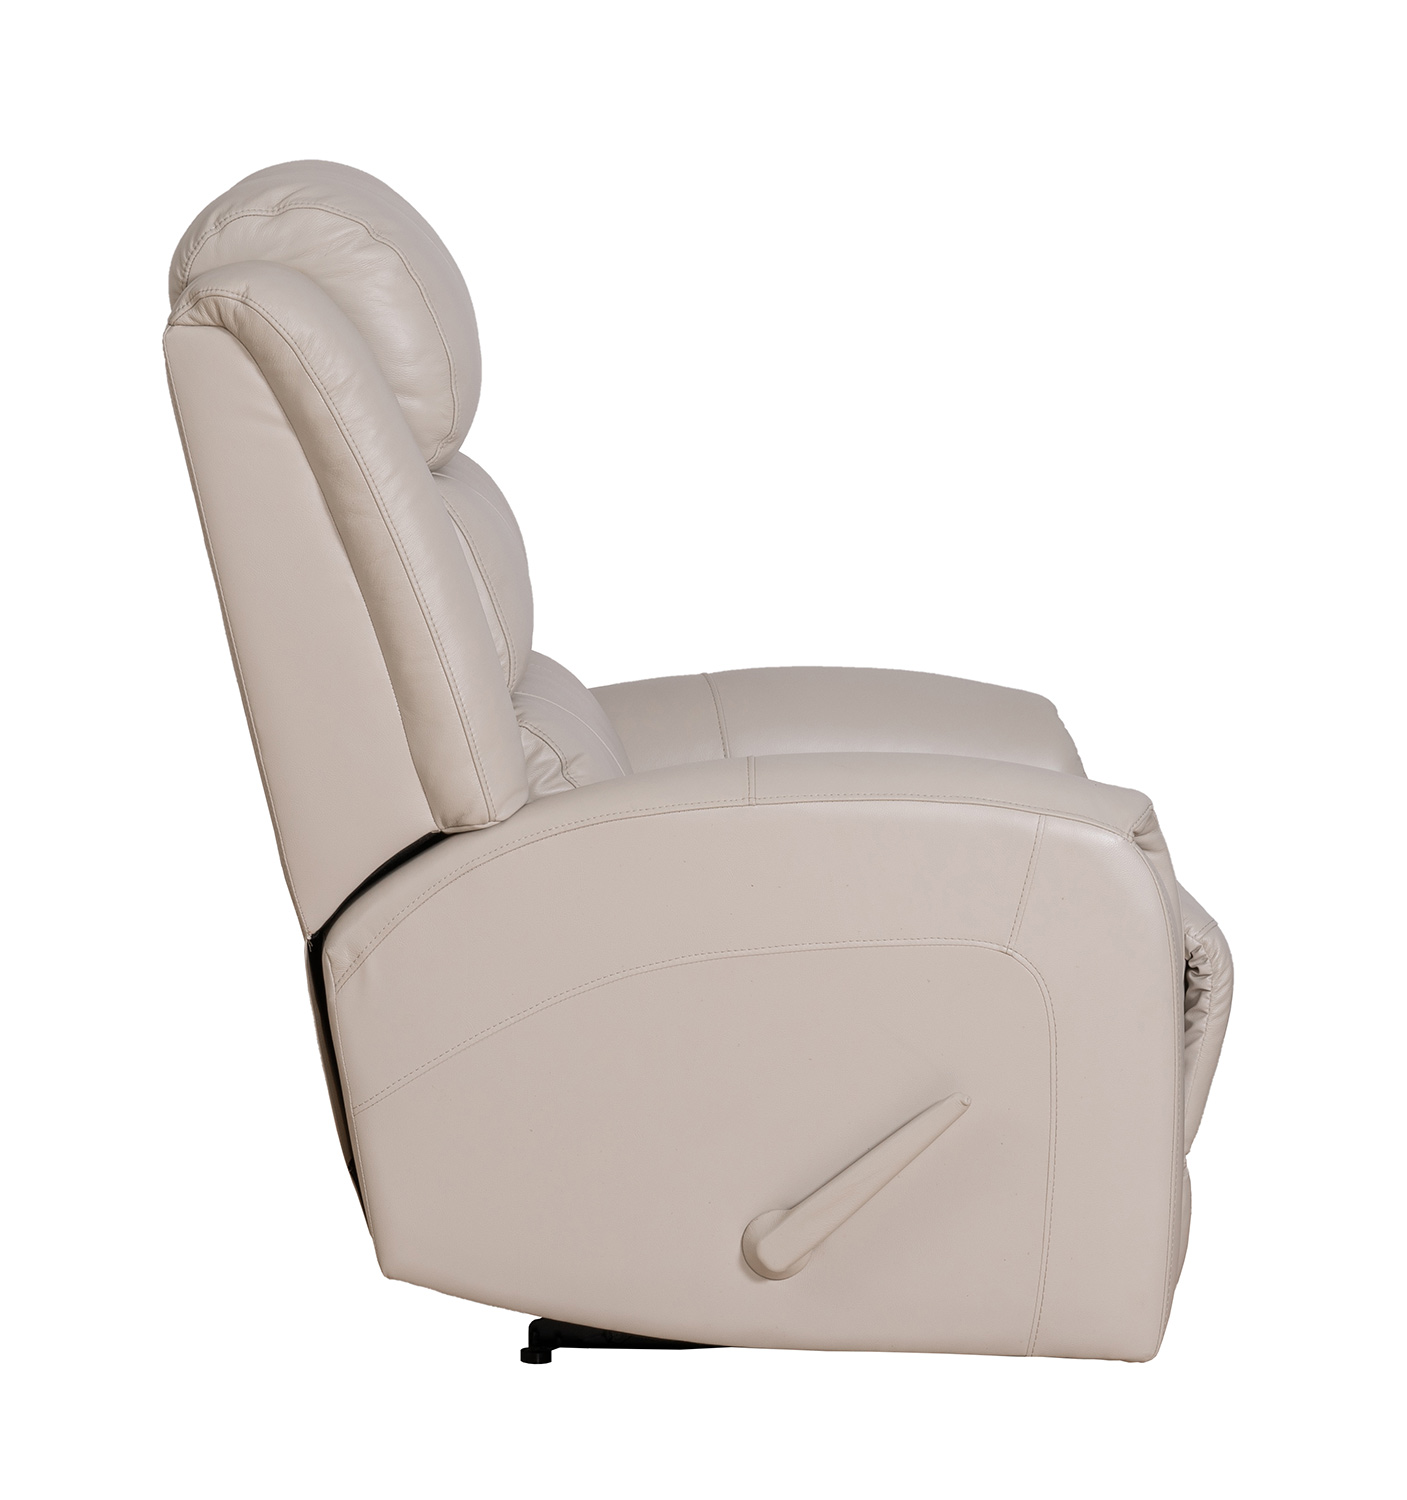 Barcalounger Bradley Big and Tall Recliner Chair - Lux Cream/Leather Match